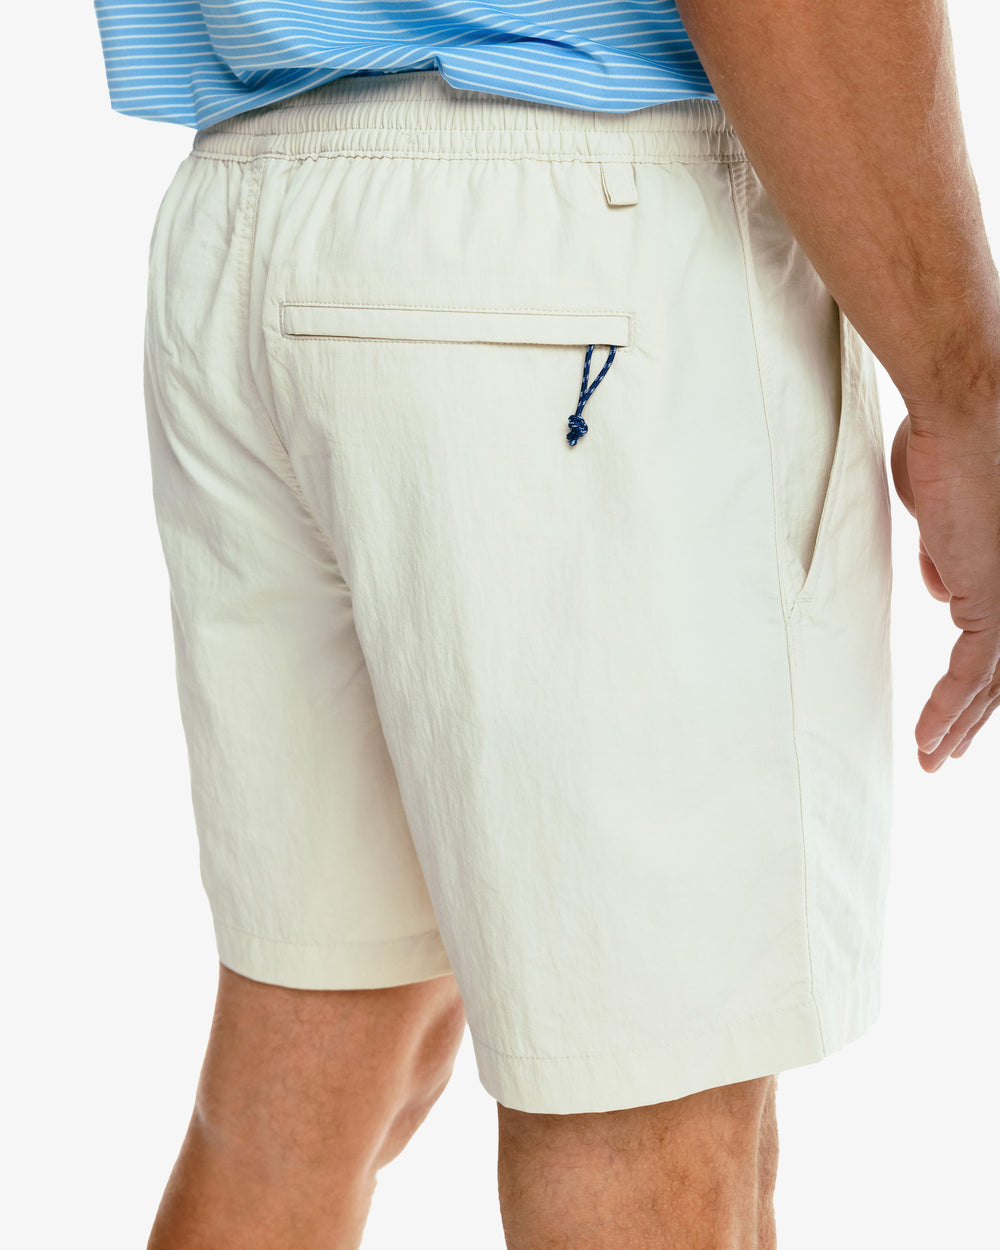 The model side model view of the Men's Shoreline 6 Inch Short by Southern Tide  - Stone